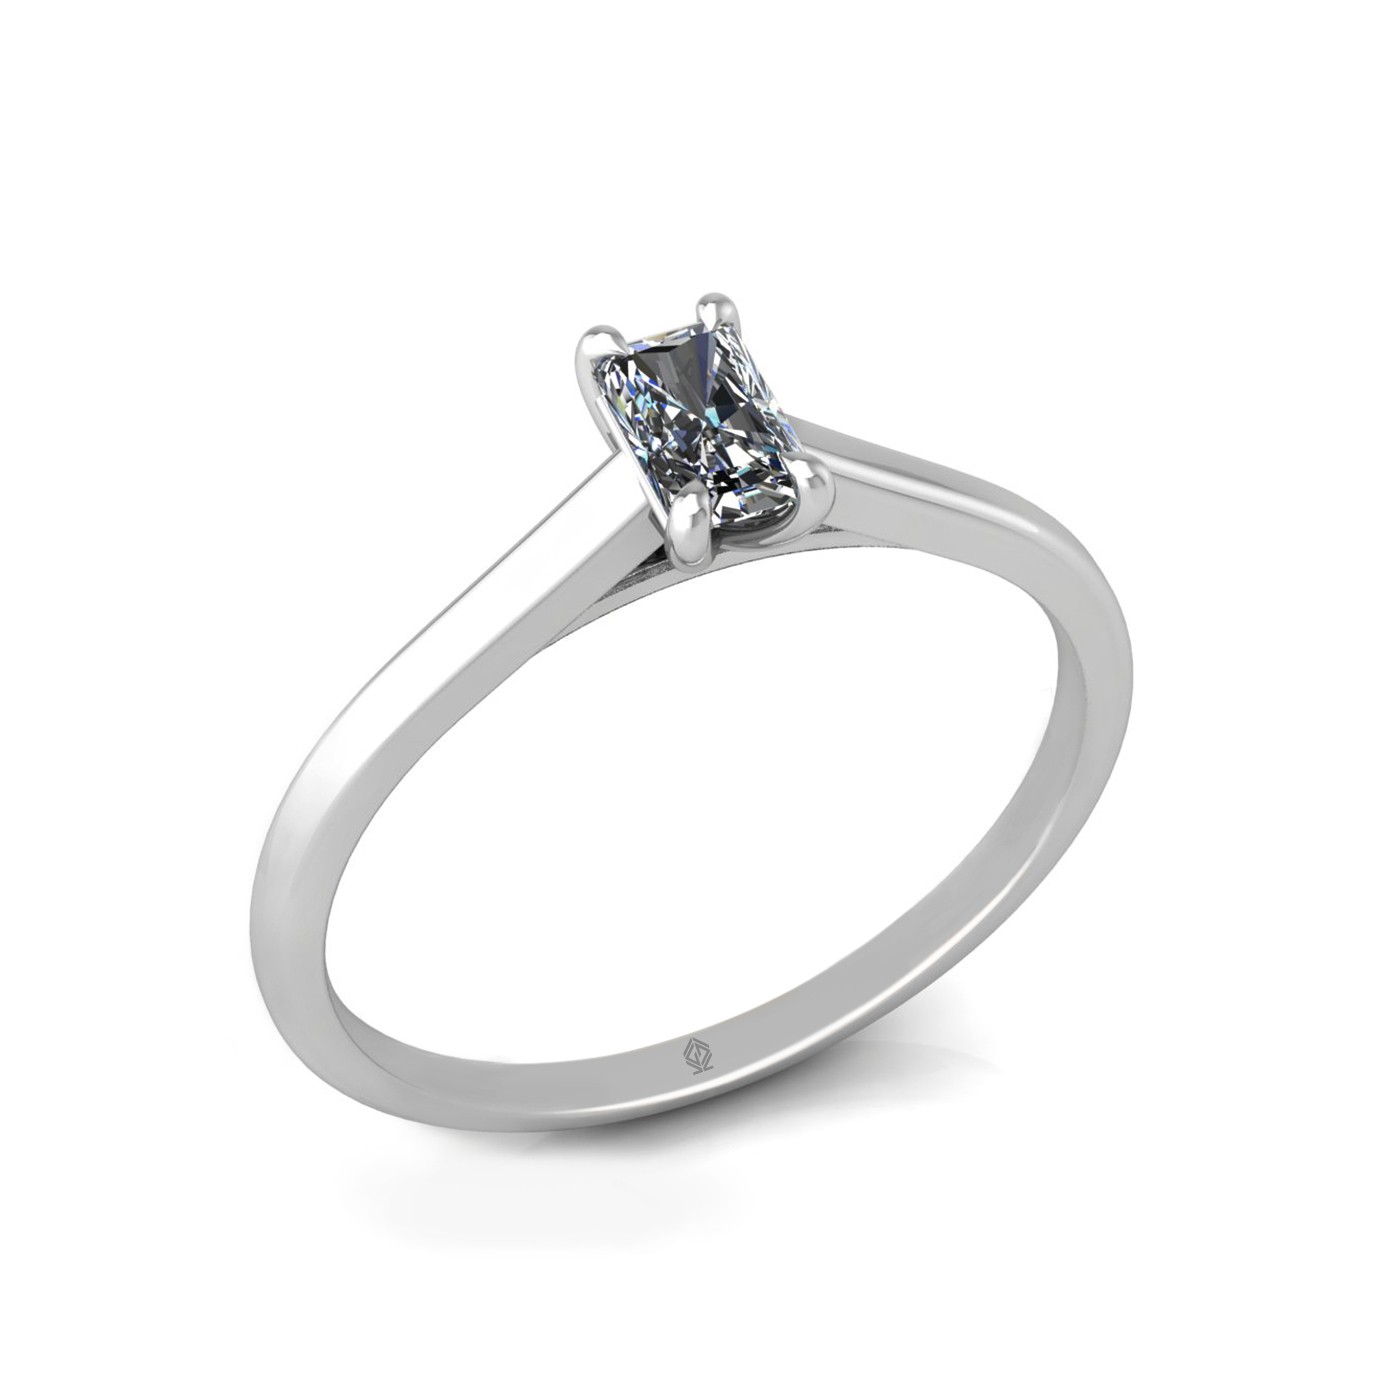 18k white gold  0,30 ct 4 prongs solitaire radiant cut diamond engagement ring with whisper thin band